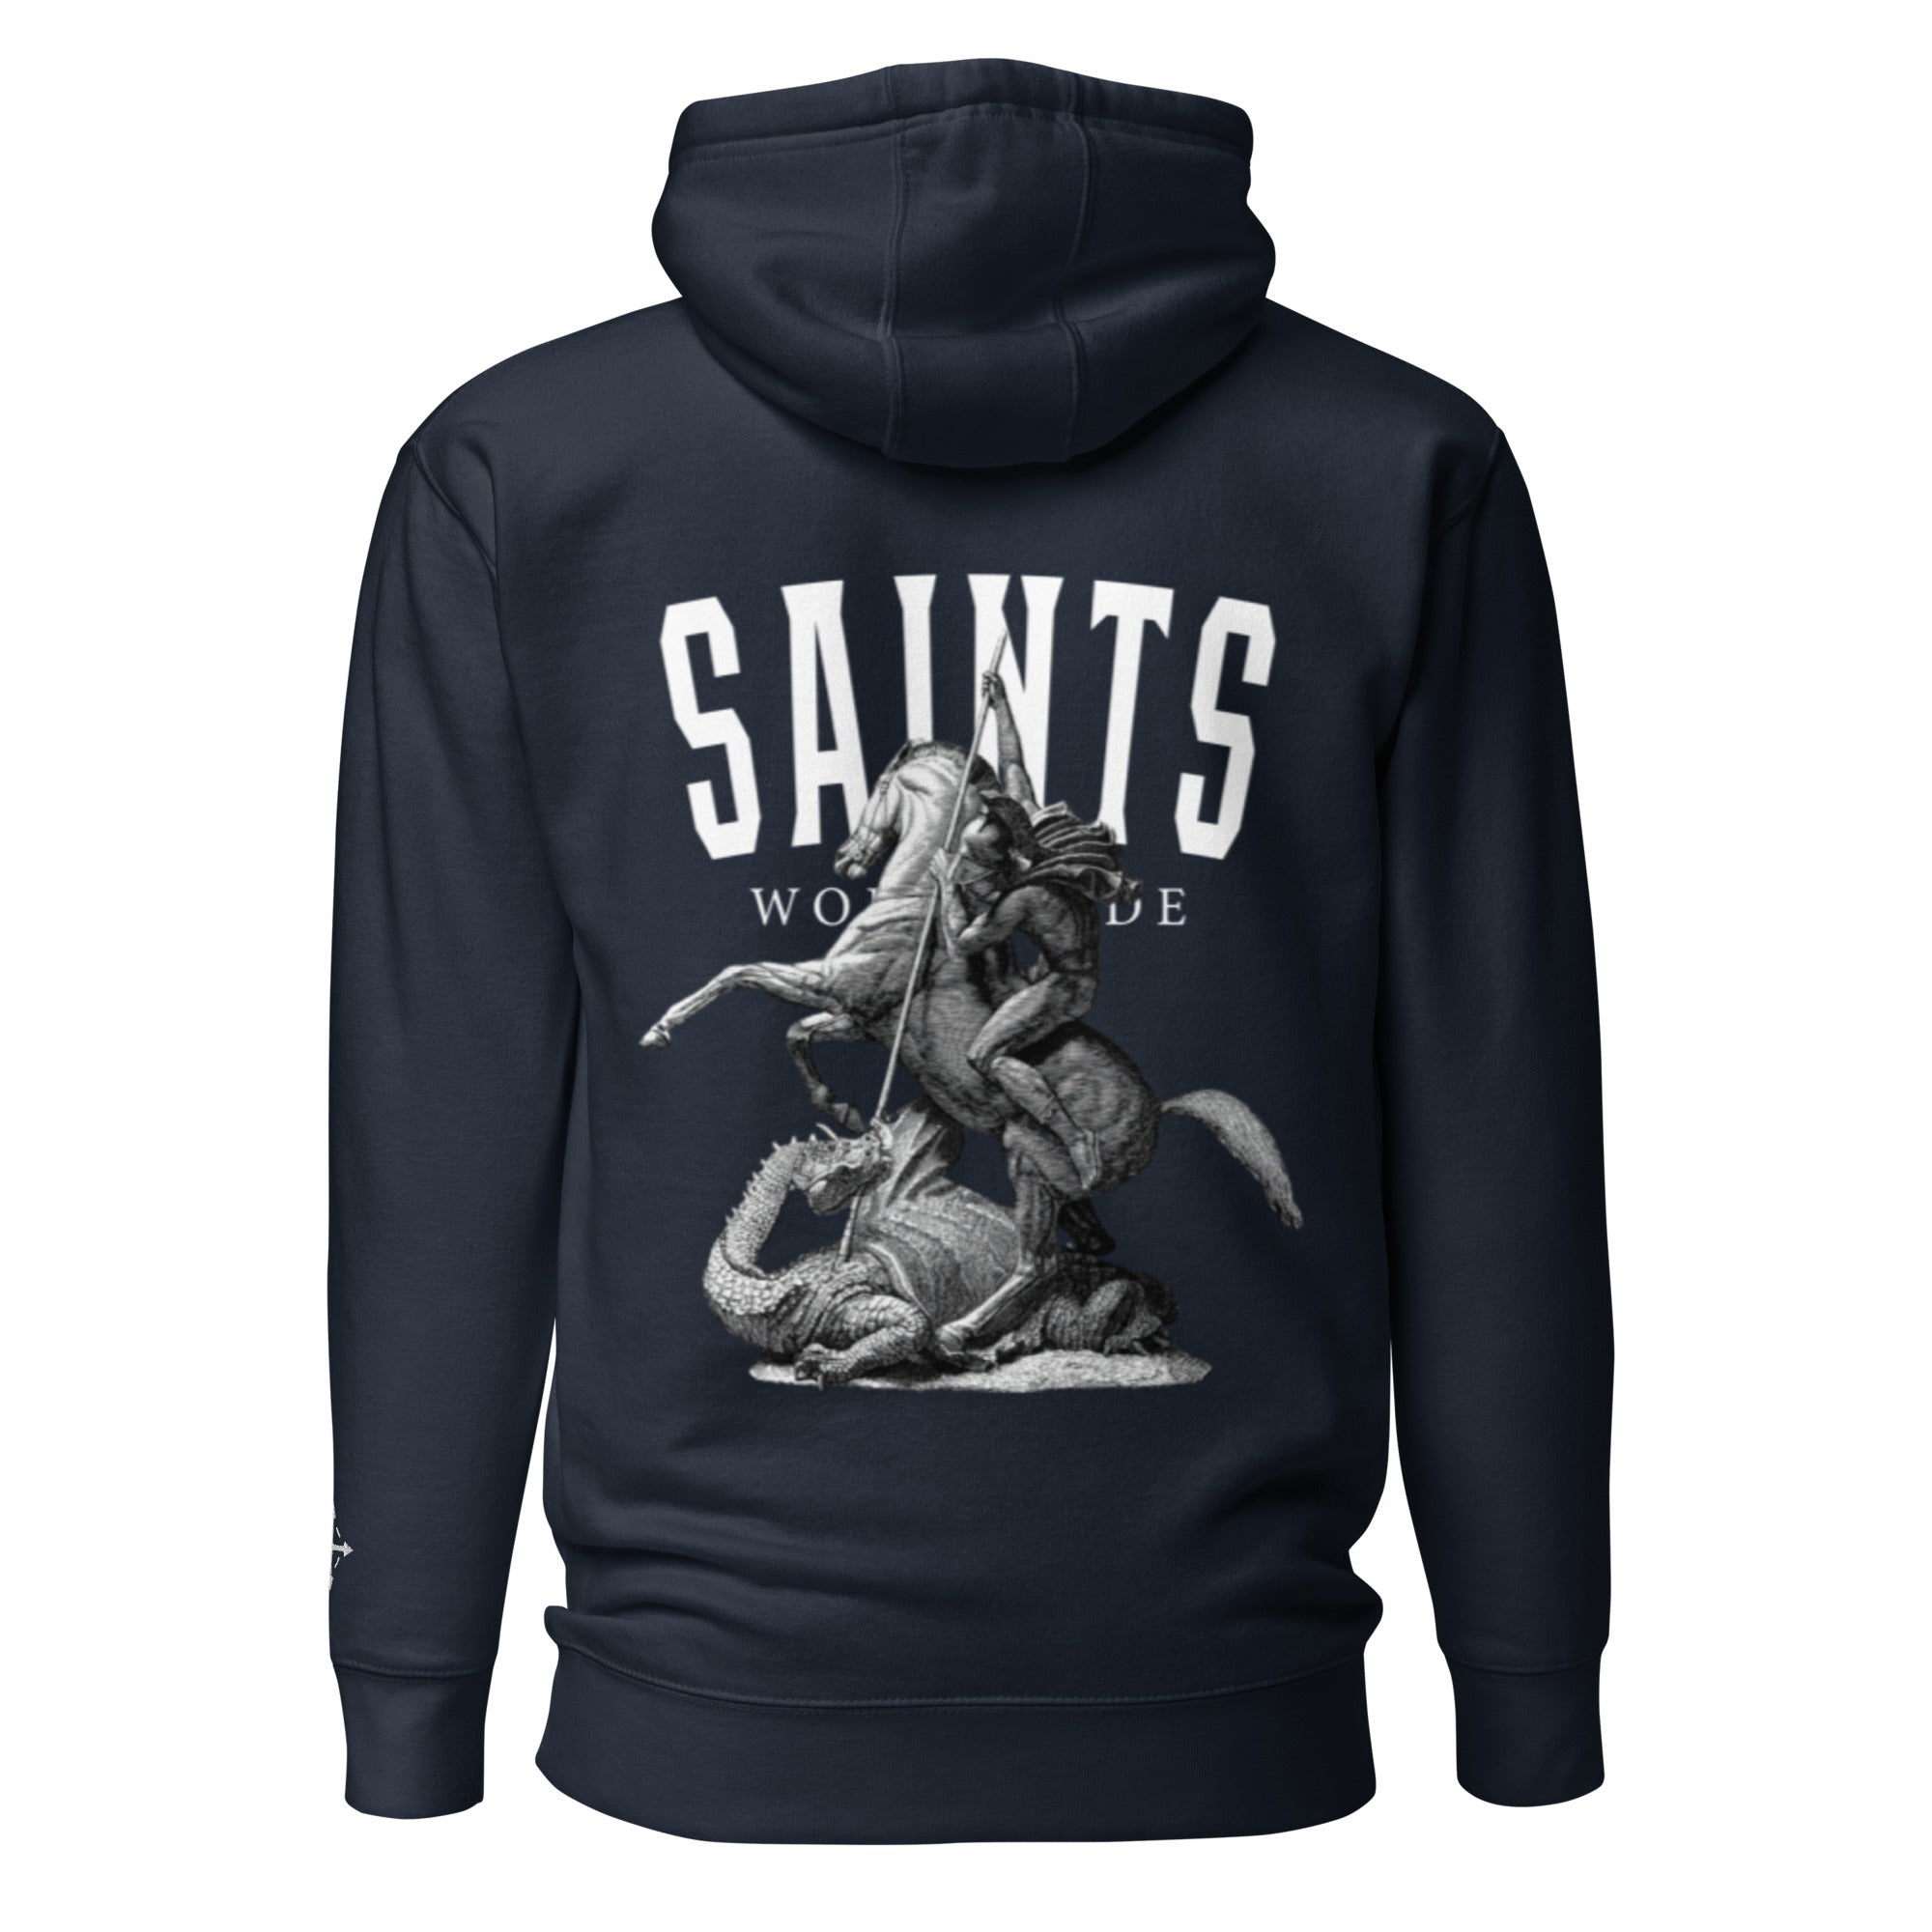 SAINTS WORLDWIDE Embroidered Hoodie - Navy Blue - Great Commission Company